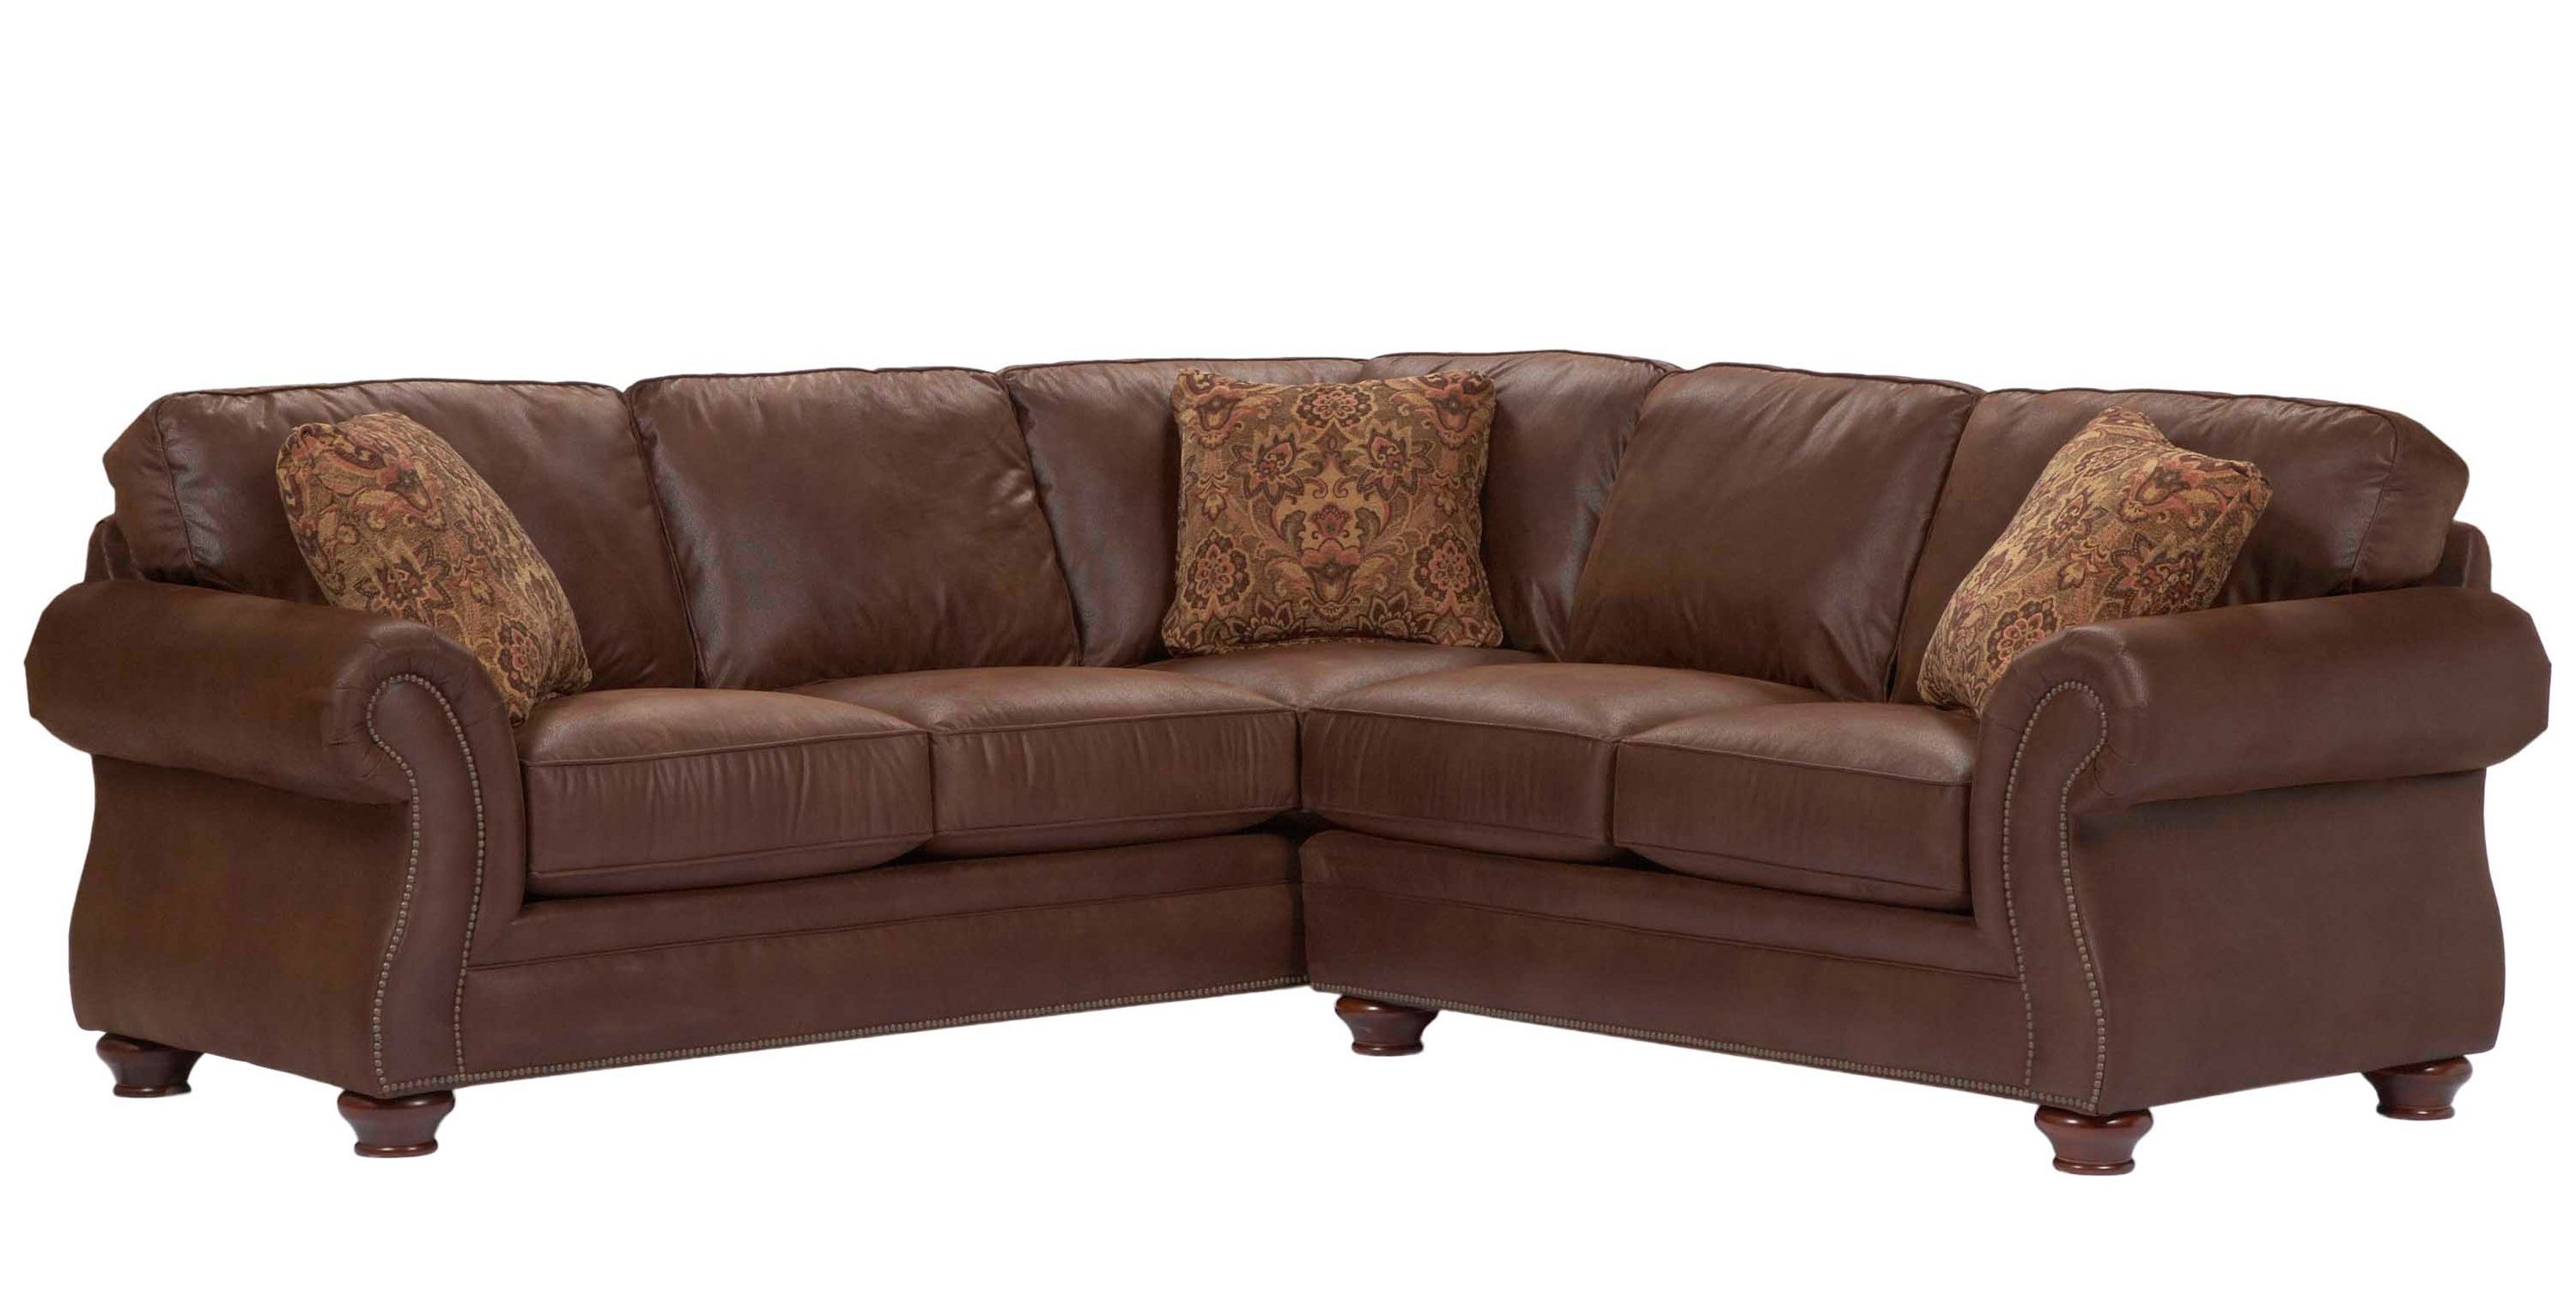 Broyhill Laramie Sectional 5080 1Q/5080 4Q Intended For Sectional Sofas At Broyhill (View 9 of 10)